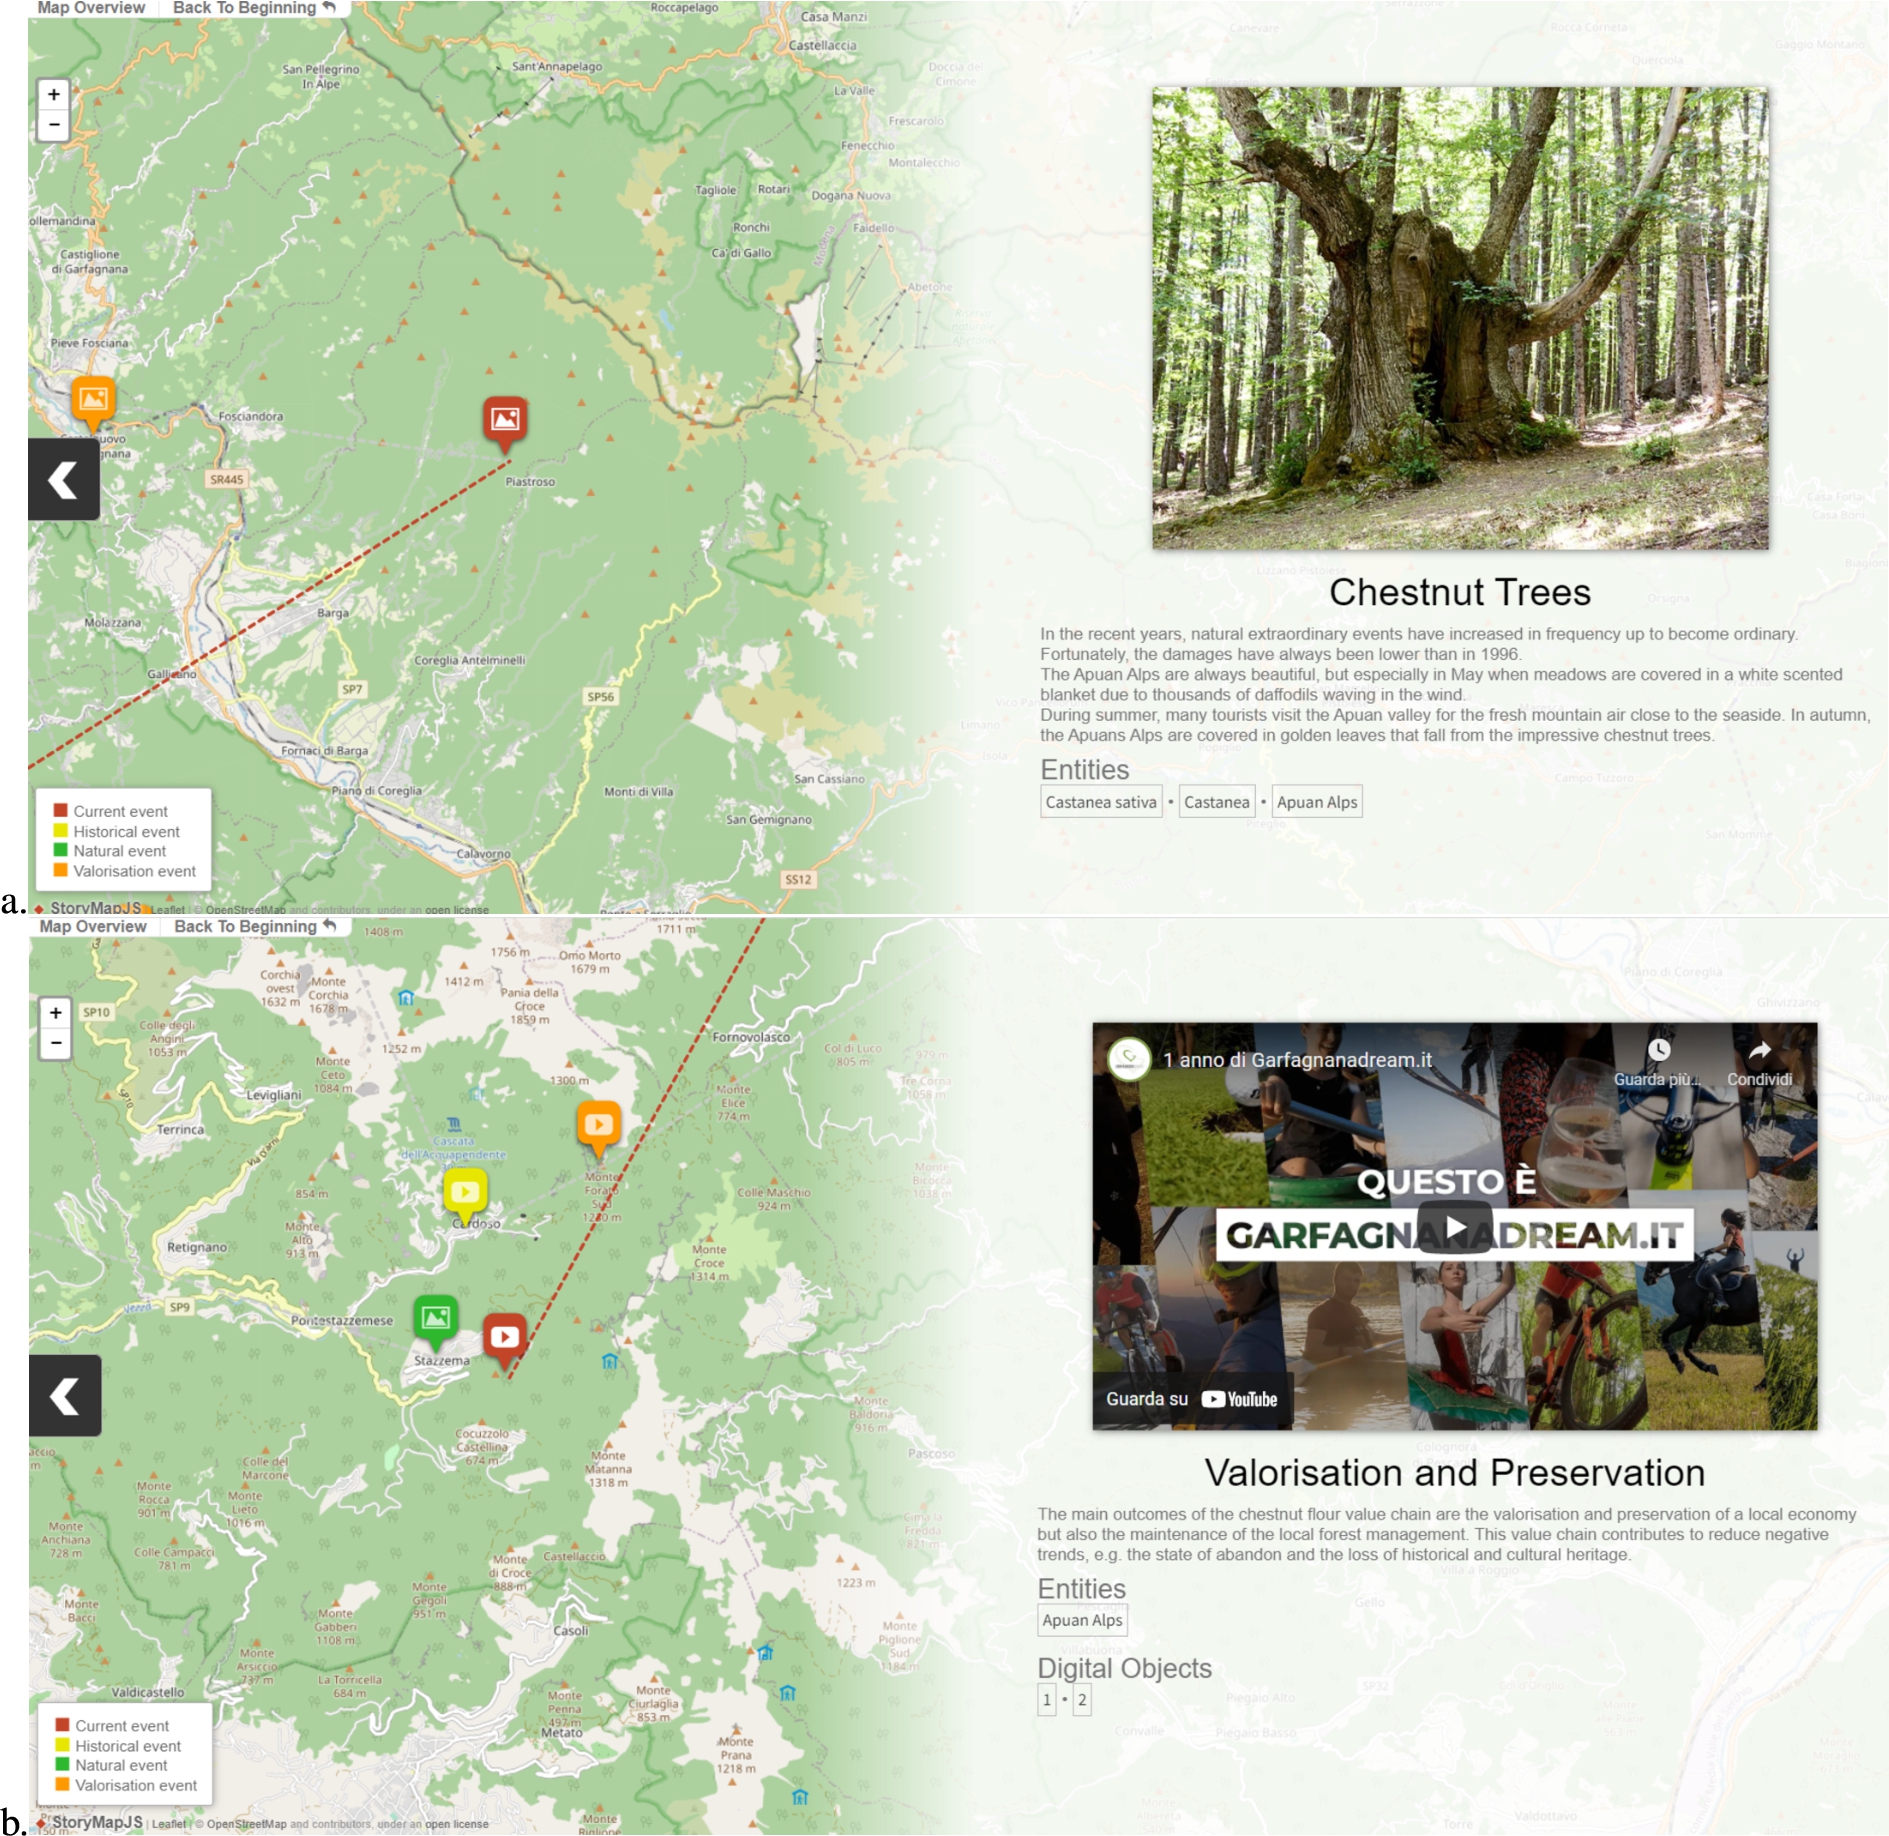 a. An event of our story map case study on Apuan Alps regarding the beauty of the centuries-old Chestnut trees; b. an event of the same story map that includes a video about the valorization and preservation of the local economy.